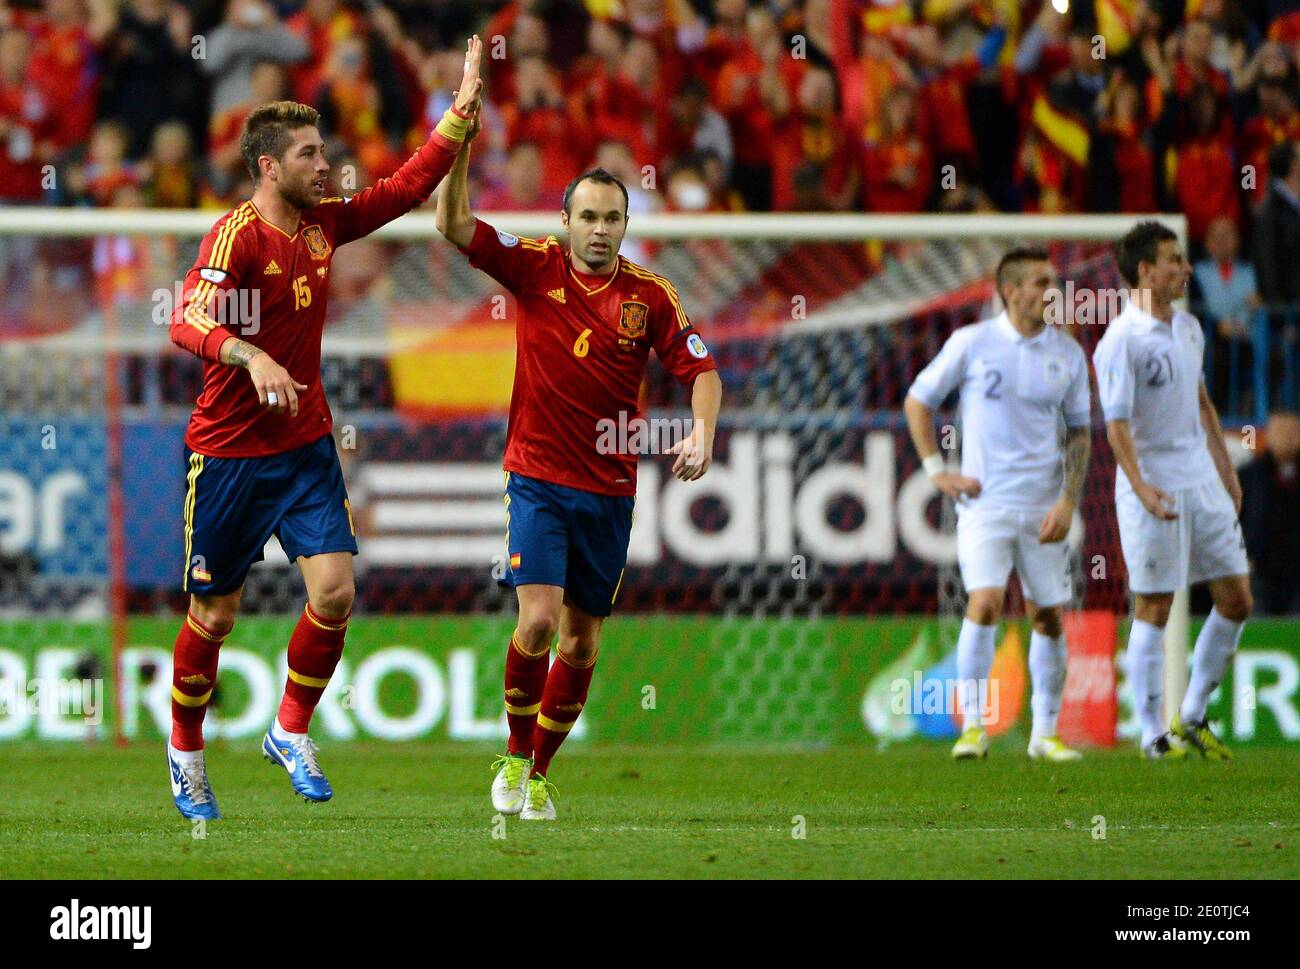 Spain's Sergio Ramos celebrates with Andres Iniesta after scoring the first goal during the World Cup 2014 qualifying soccer match, Spain Vs France at Vicente Calderon stadium in Madrid, Spain on October 16, 2012. The match ended in a 1-1 draw. Photo by Christian Liewig/ABACAPRESS.COM Stock Photo